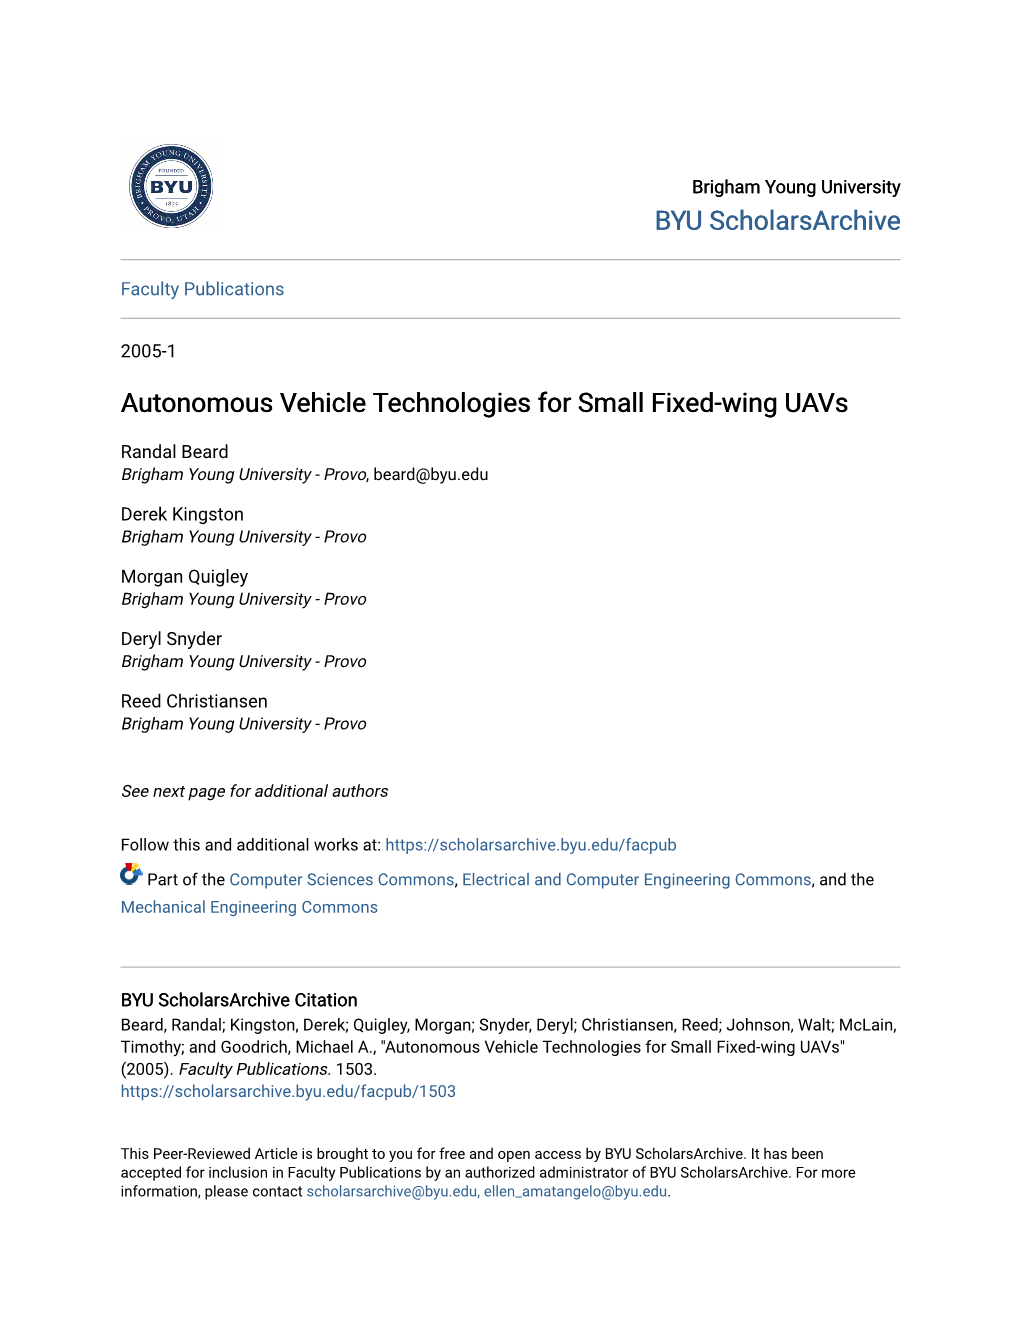 Autonomous Vehicle Technologies for Small Fixed-Wing Uavs